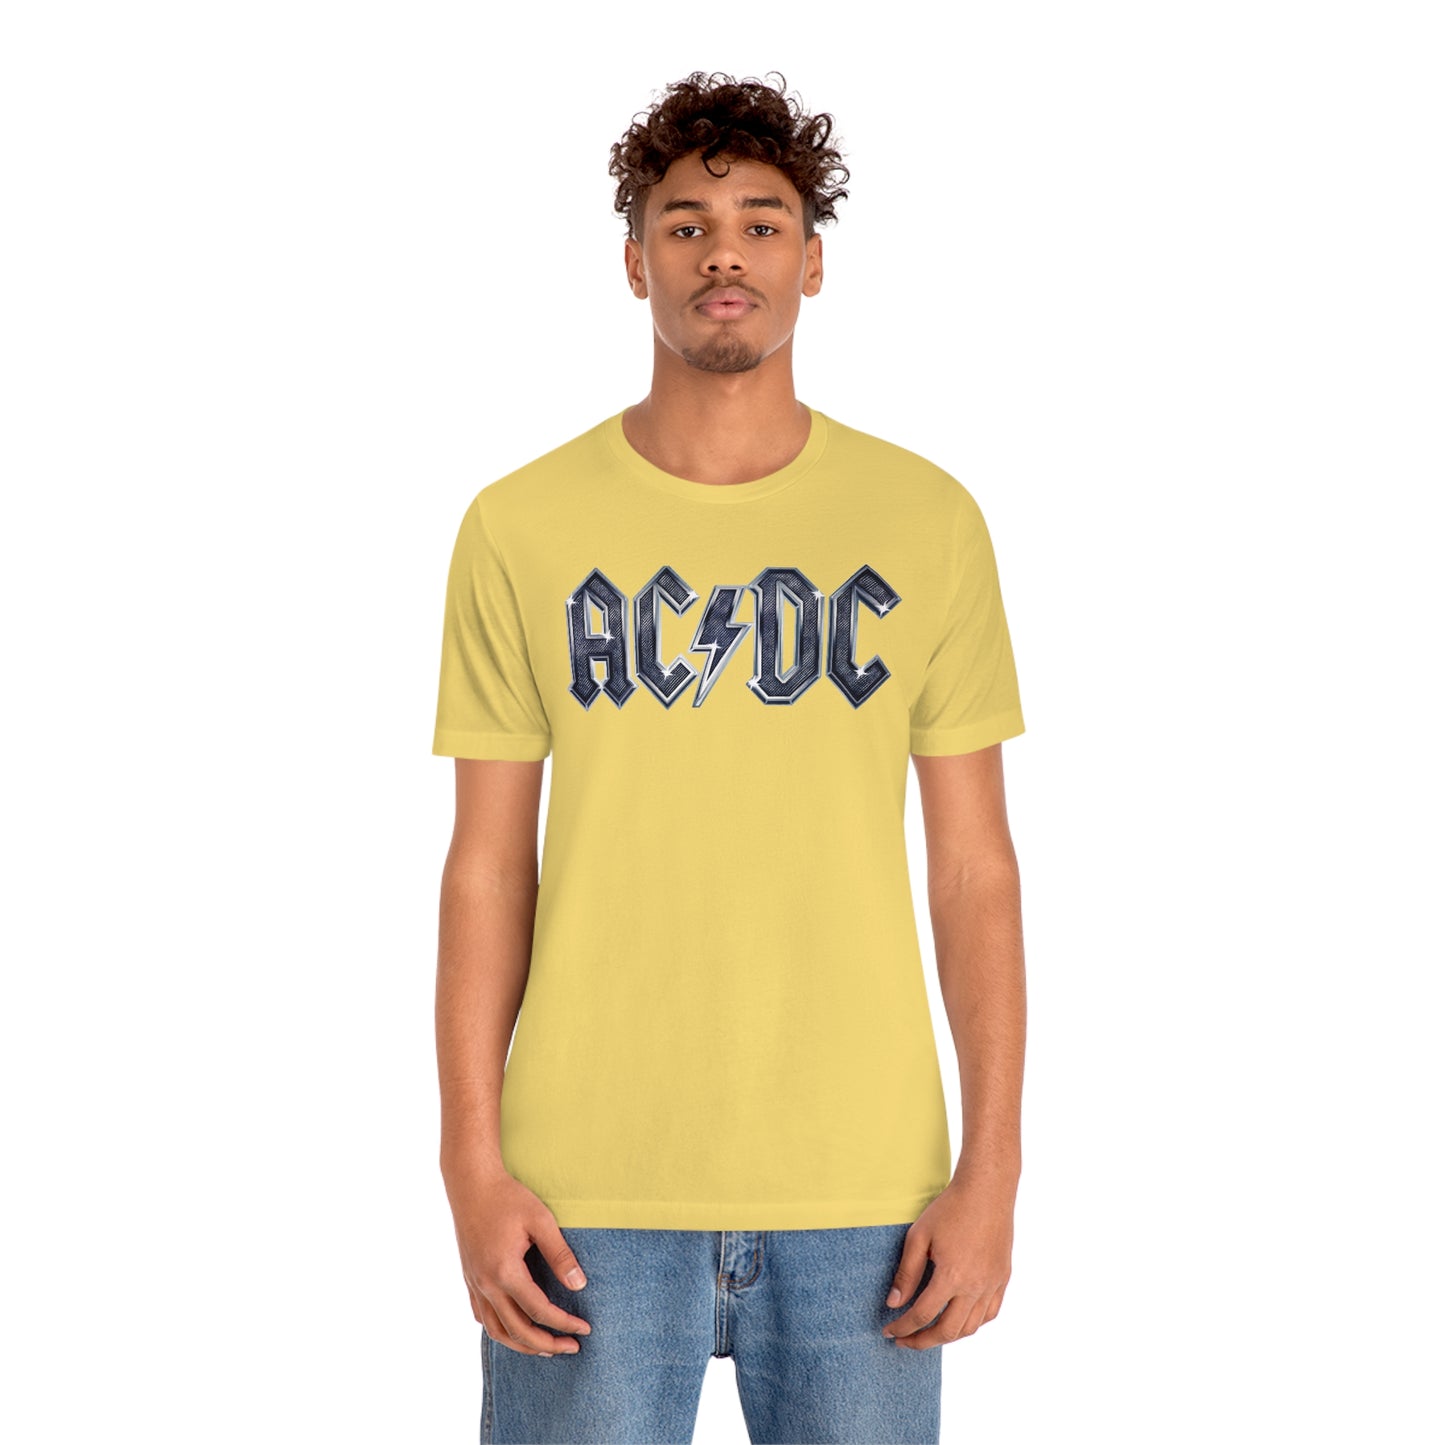 AC-DC Back In Black Album Adult Shirt, ACDC Neon Highway To Hell Rock and Roll Music Shirt